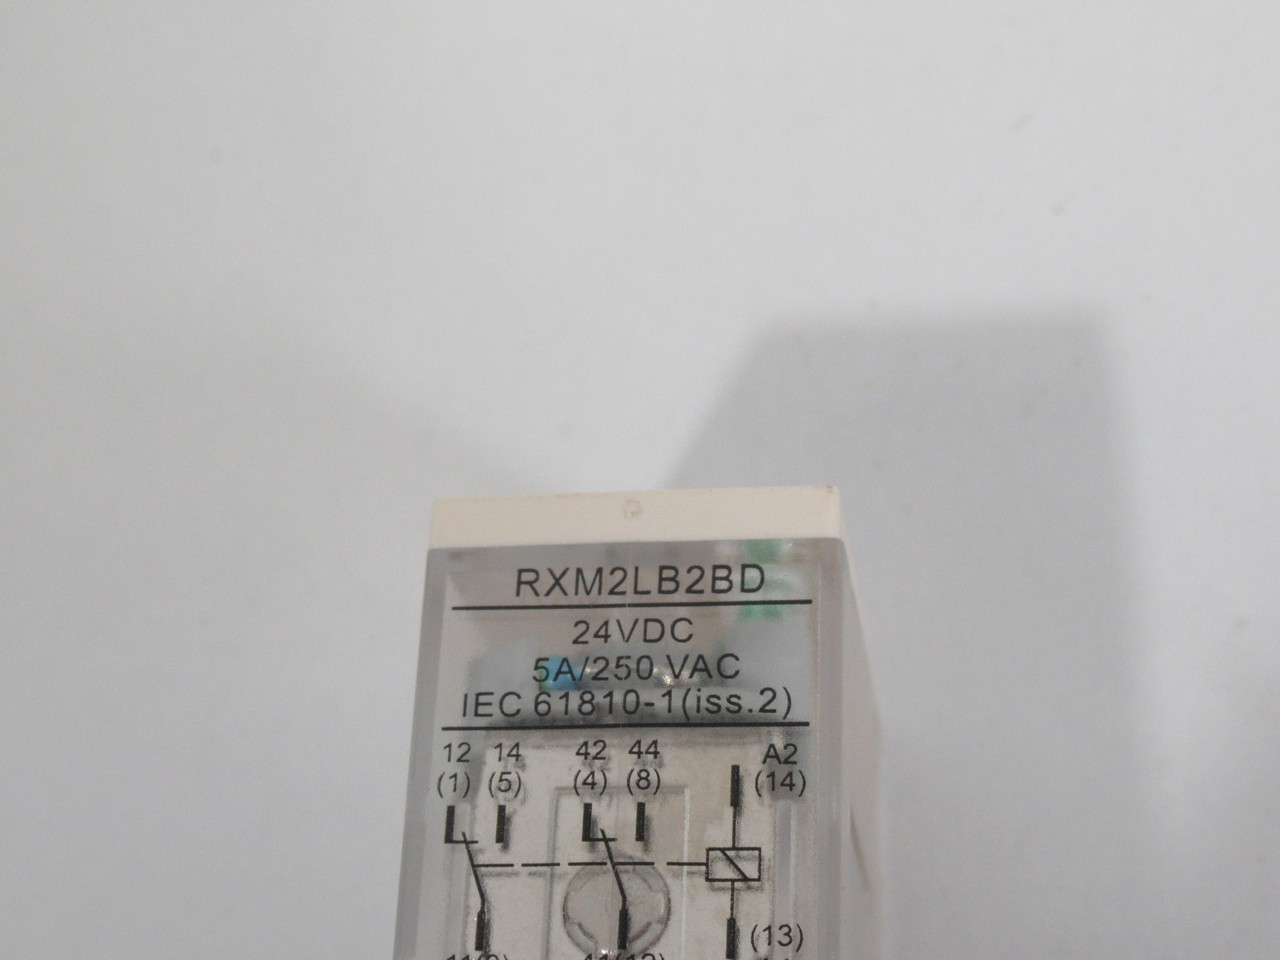 Schneider Electric RXM2LB2BD General Relay 5A@250VAC 24VDC 8-Blade USED